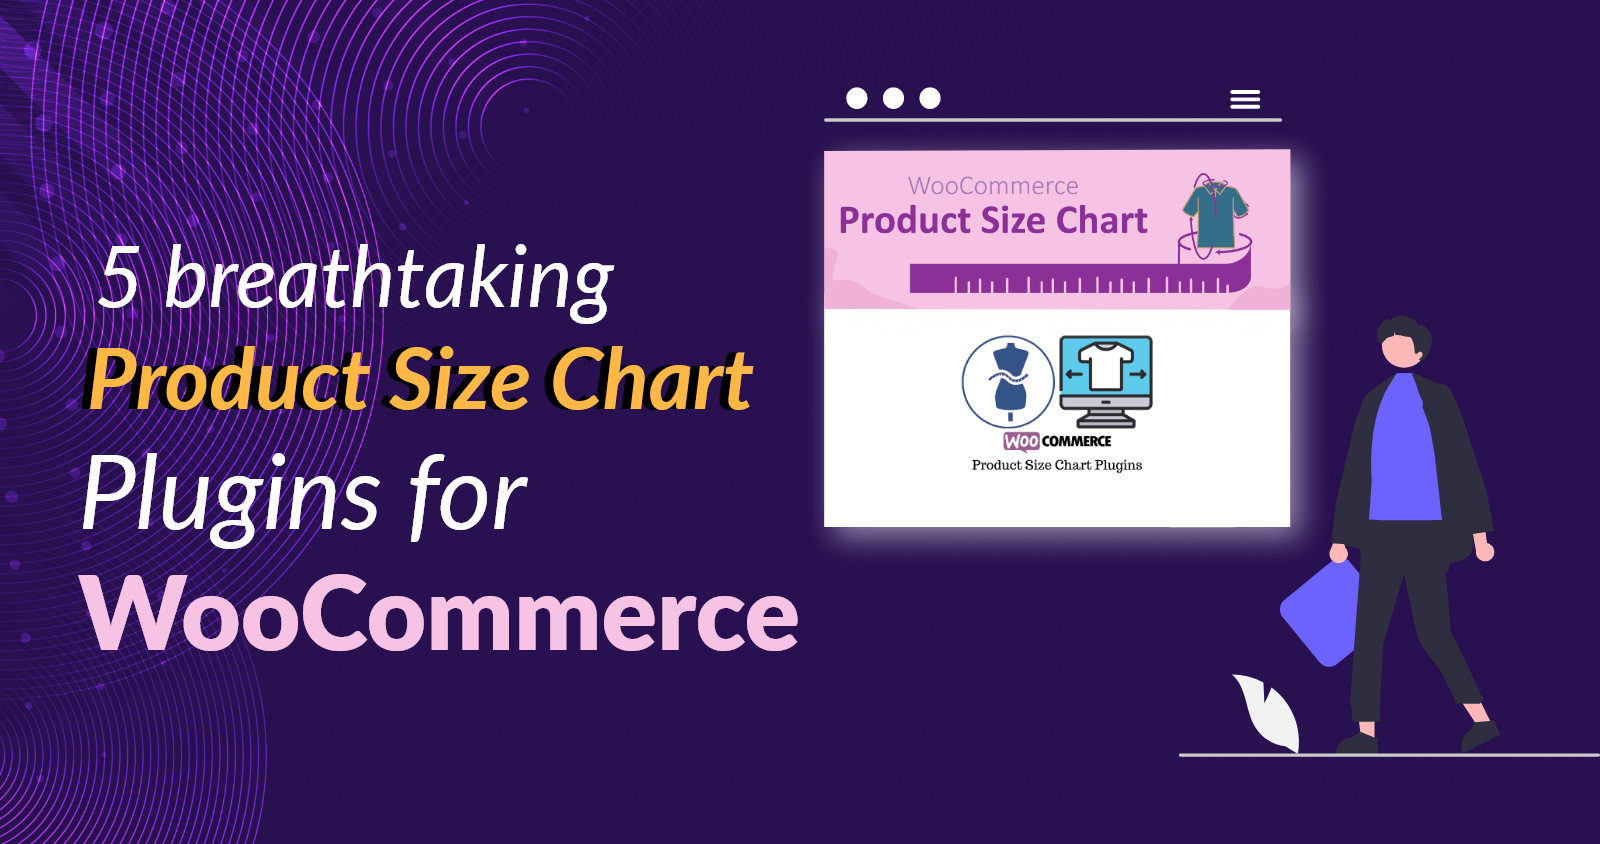 Product Size Chart Plugins for WooCommerce